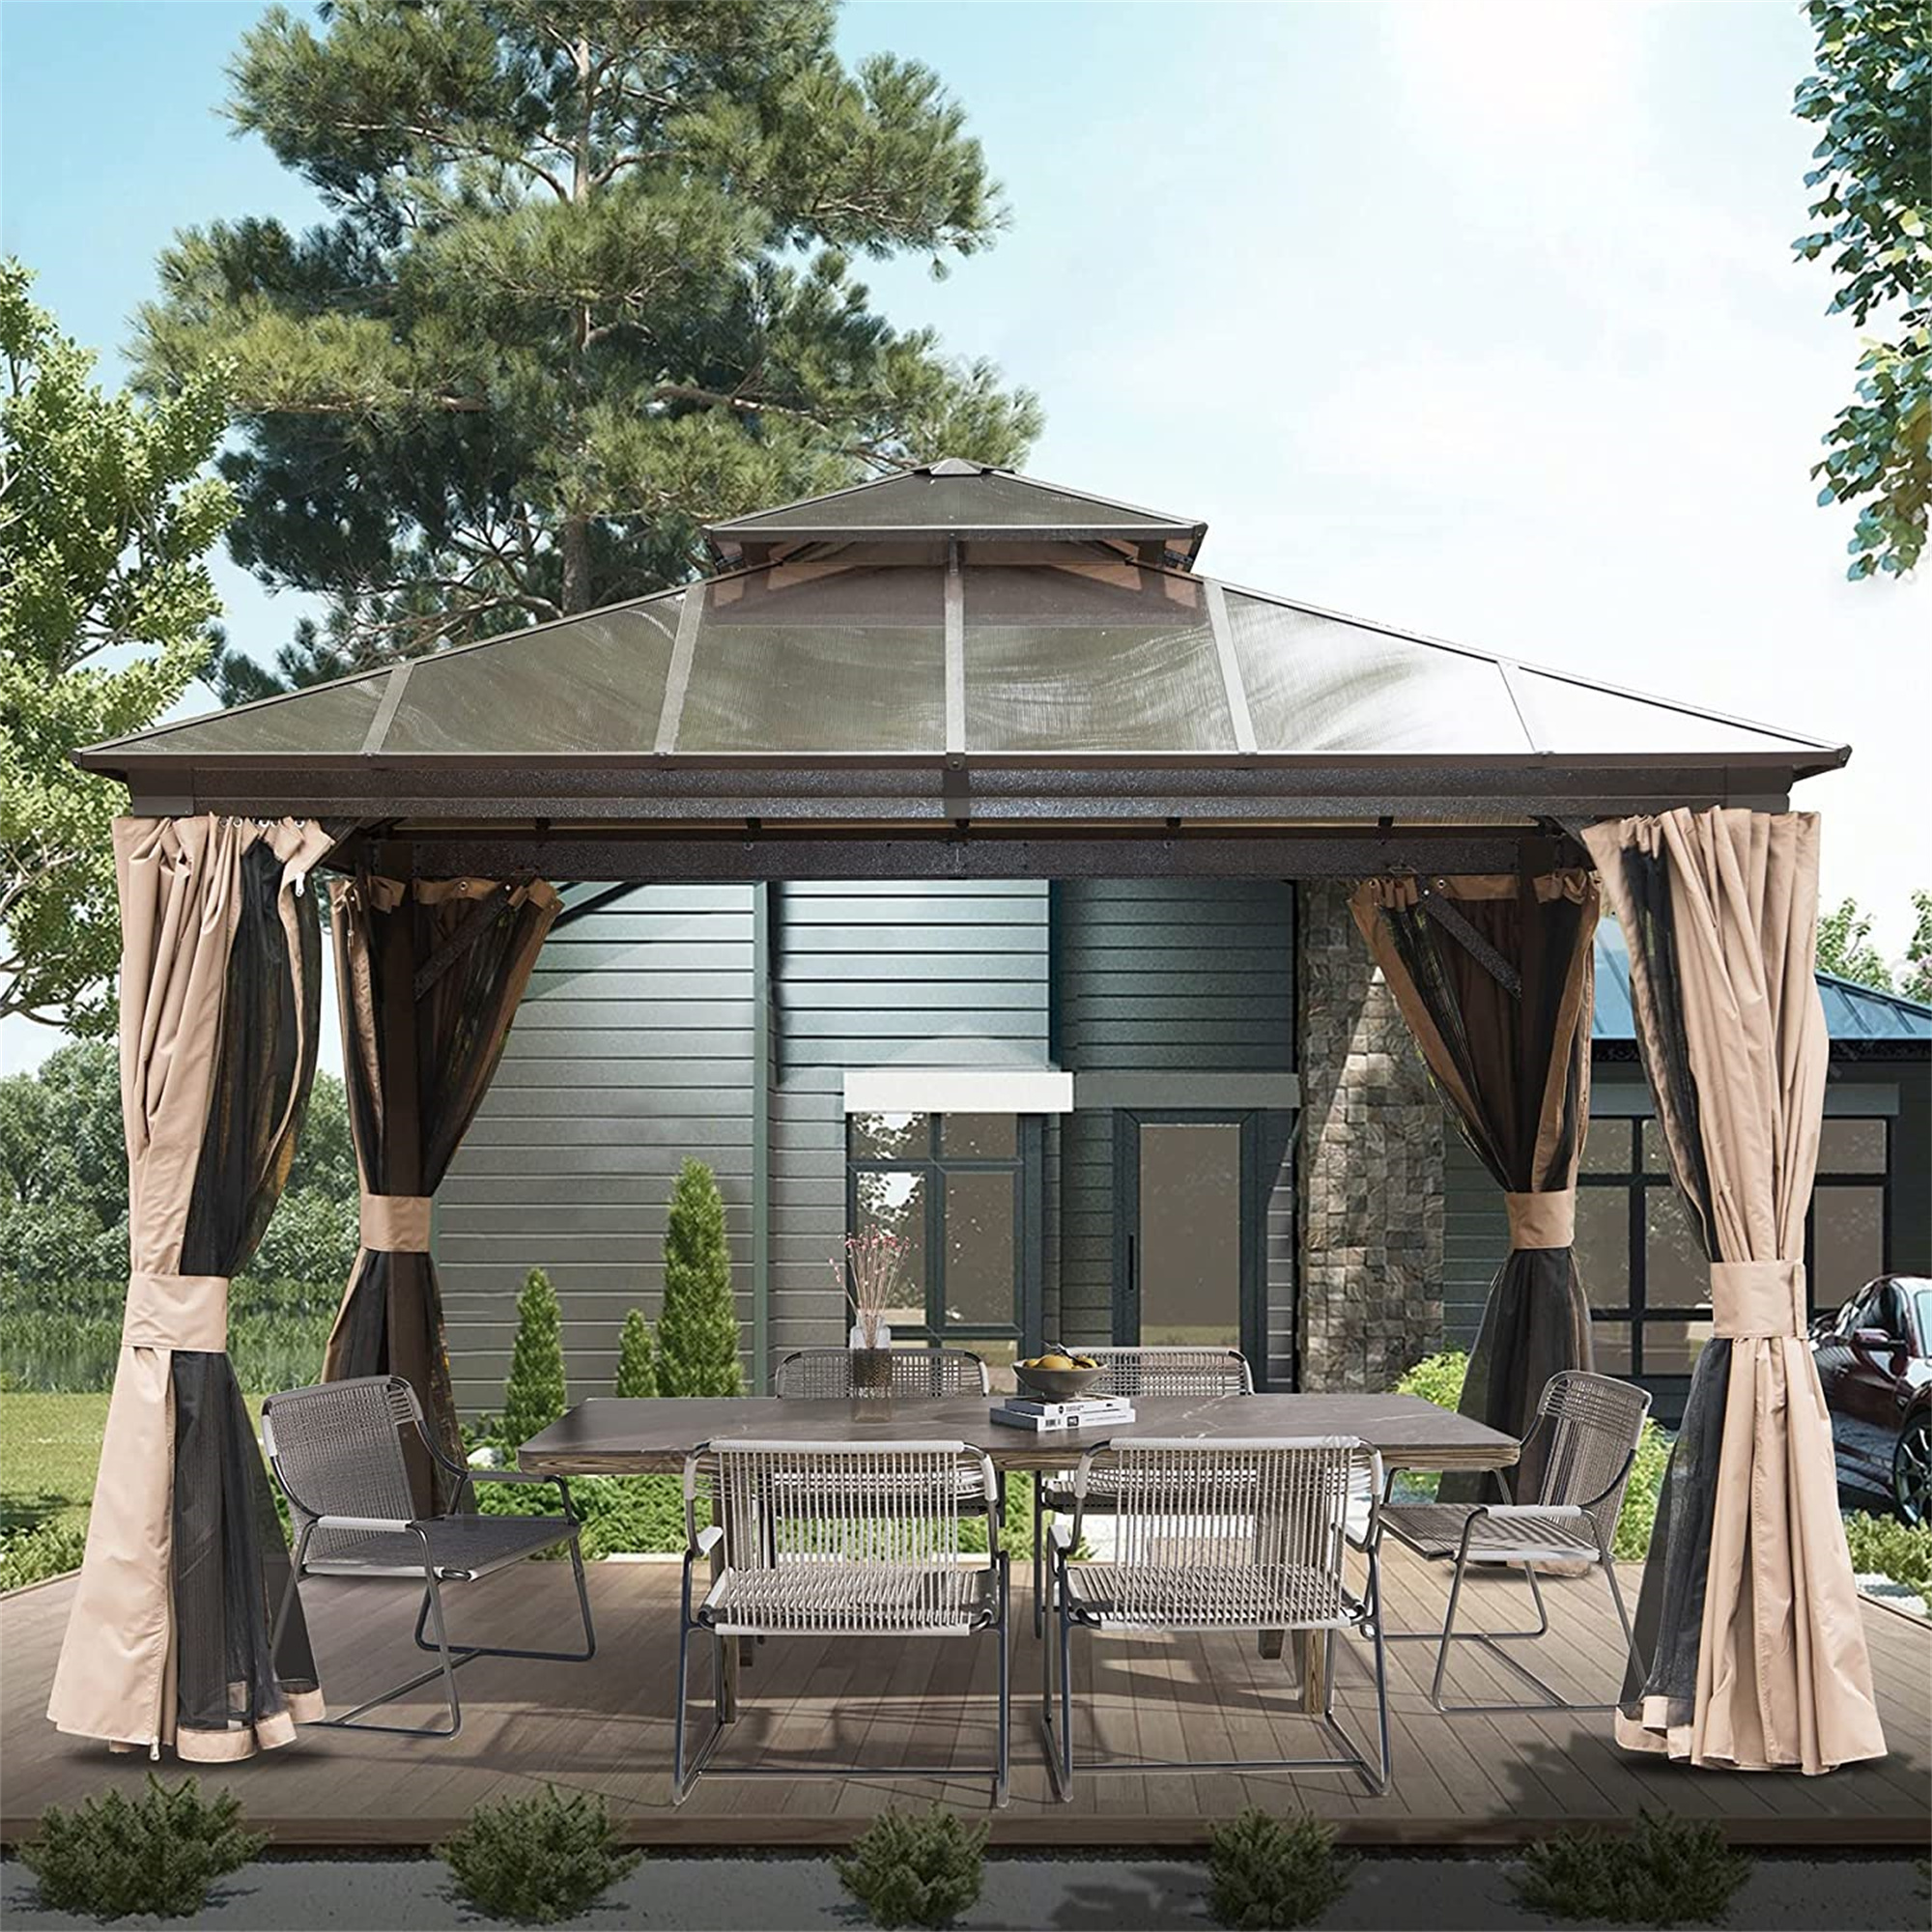 Mondawe Outdoor Sanctuary 12x12 Ft Hardtop Gazebo Elegant and Durable Pavilion with Polycarbonate Double Roof, Curtains, and Net for Gardens, Patios, Lawns, Decks, and Backyards